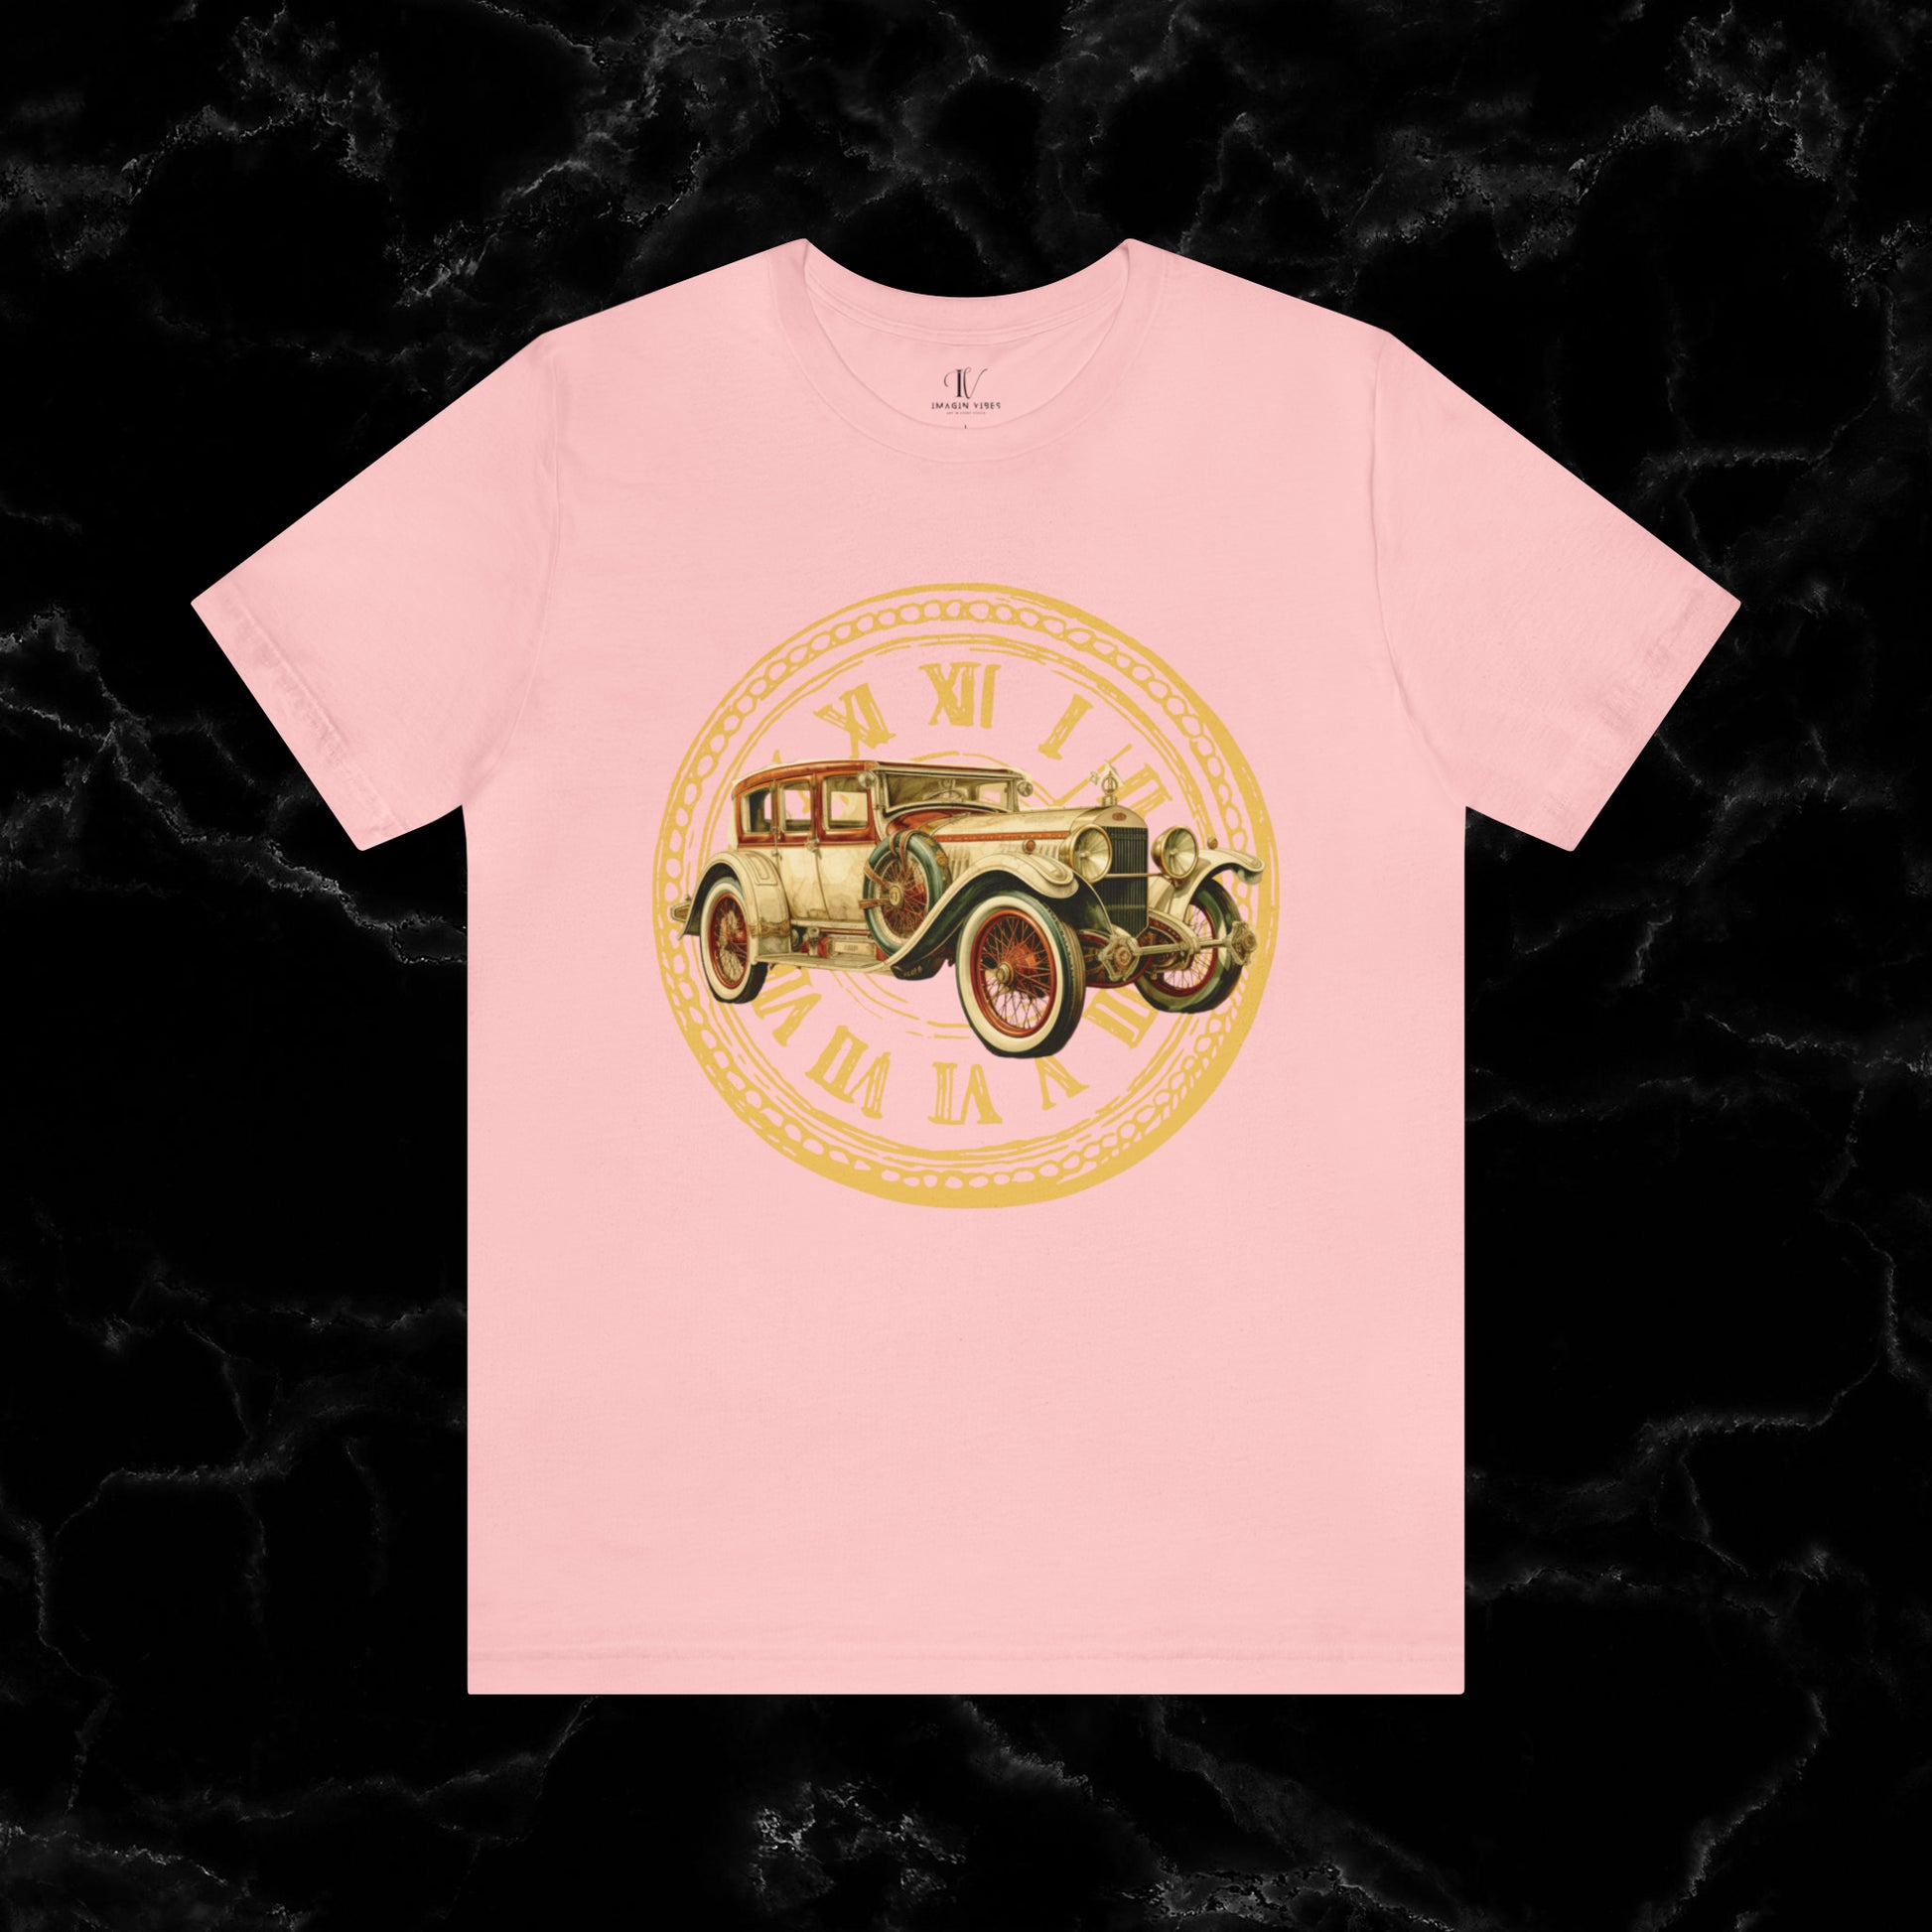 Vintage Car Enthusiast T-Shirt with Classic Wheels and Timeless Appeal T-Shirt Pink S 